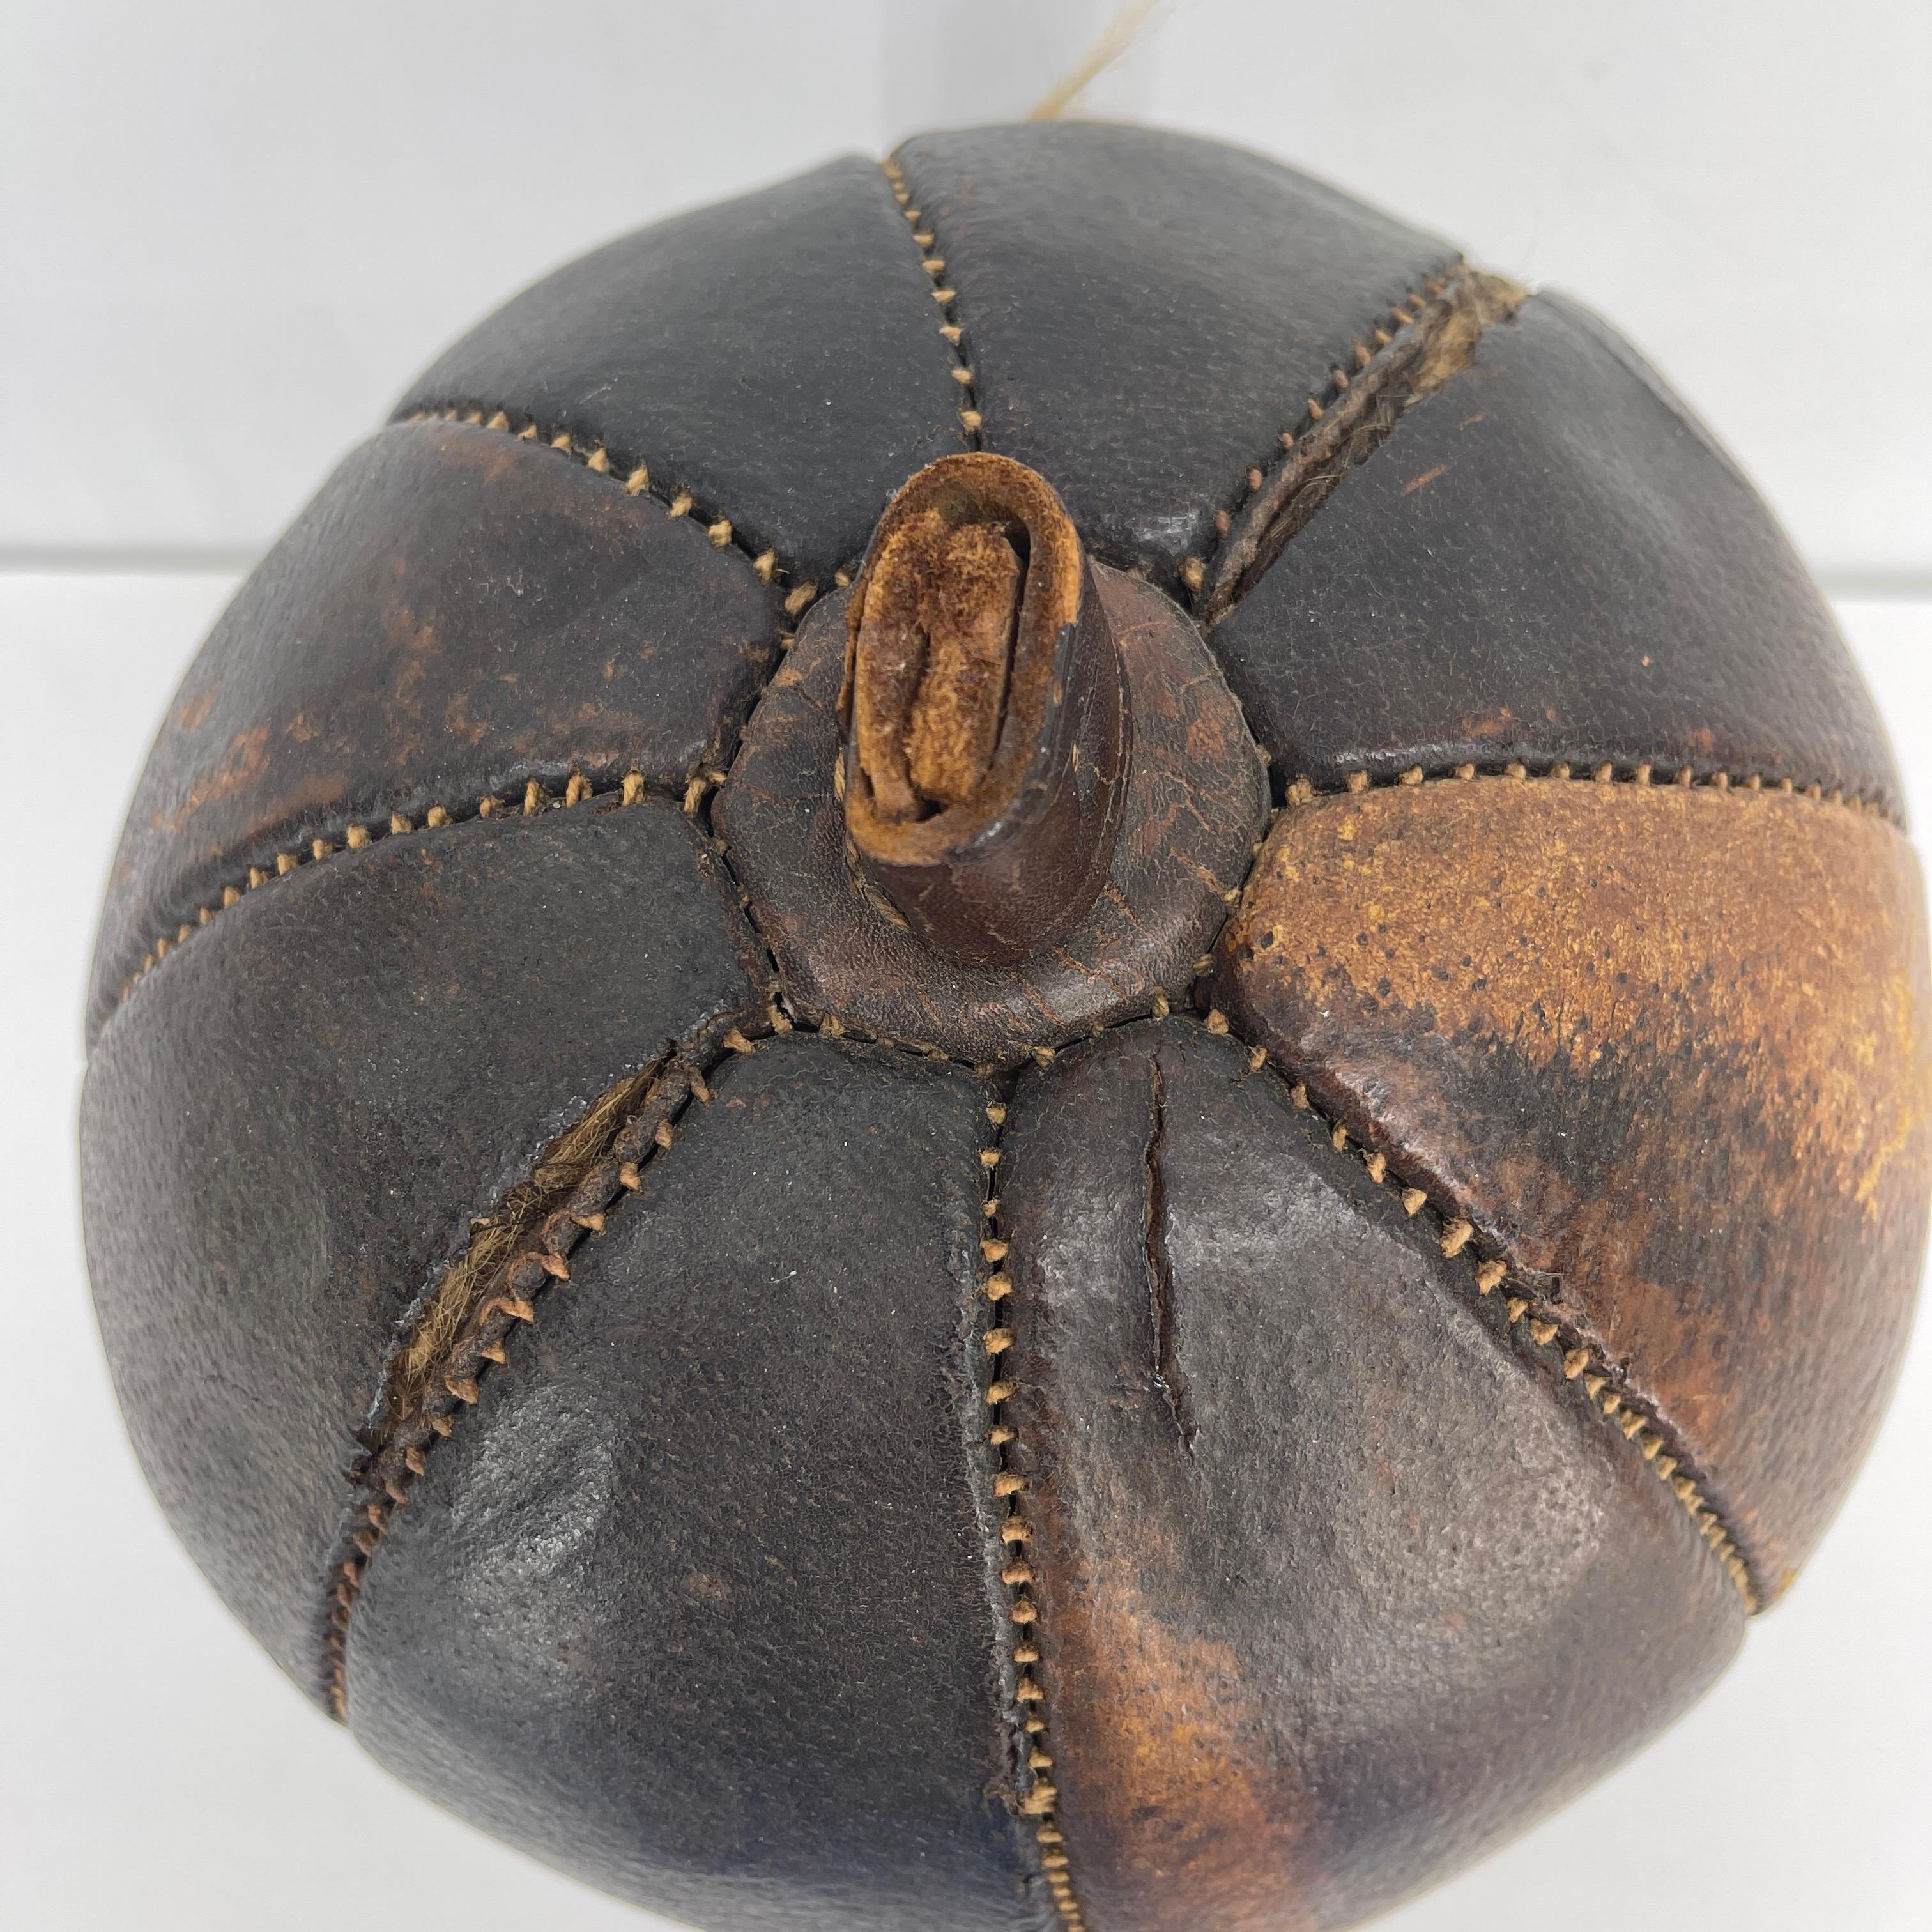 Hand-Crafted Abercrombie & Fitch Hand-Stitched Leather Pumpkin by Omersa & Company For Sale